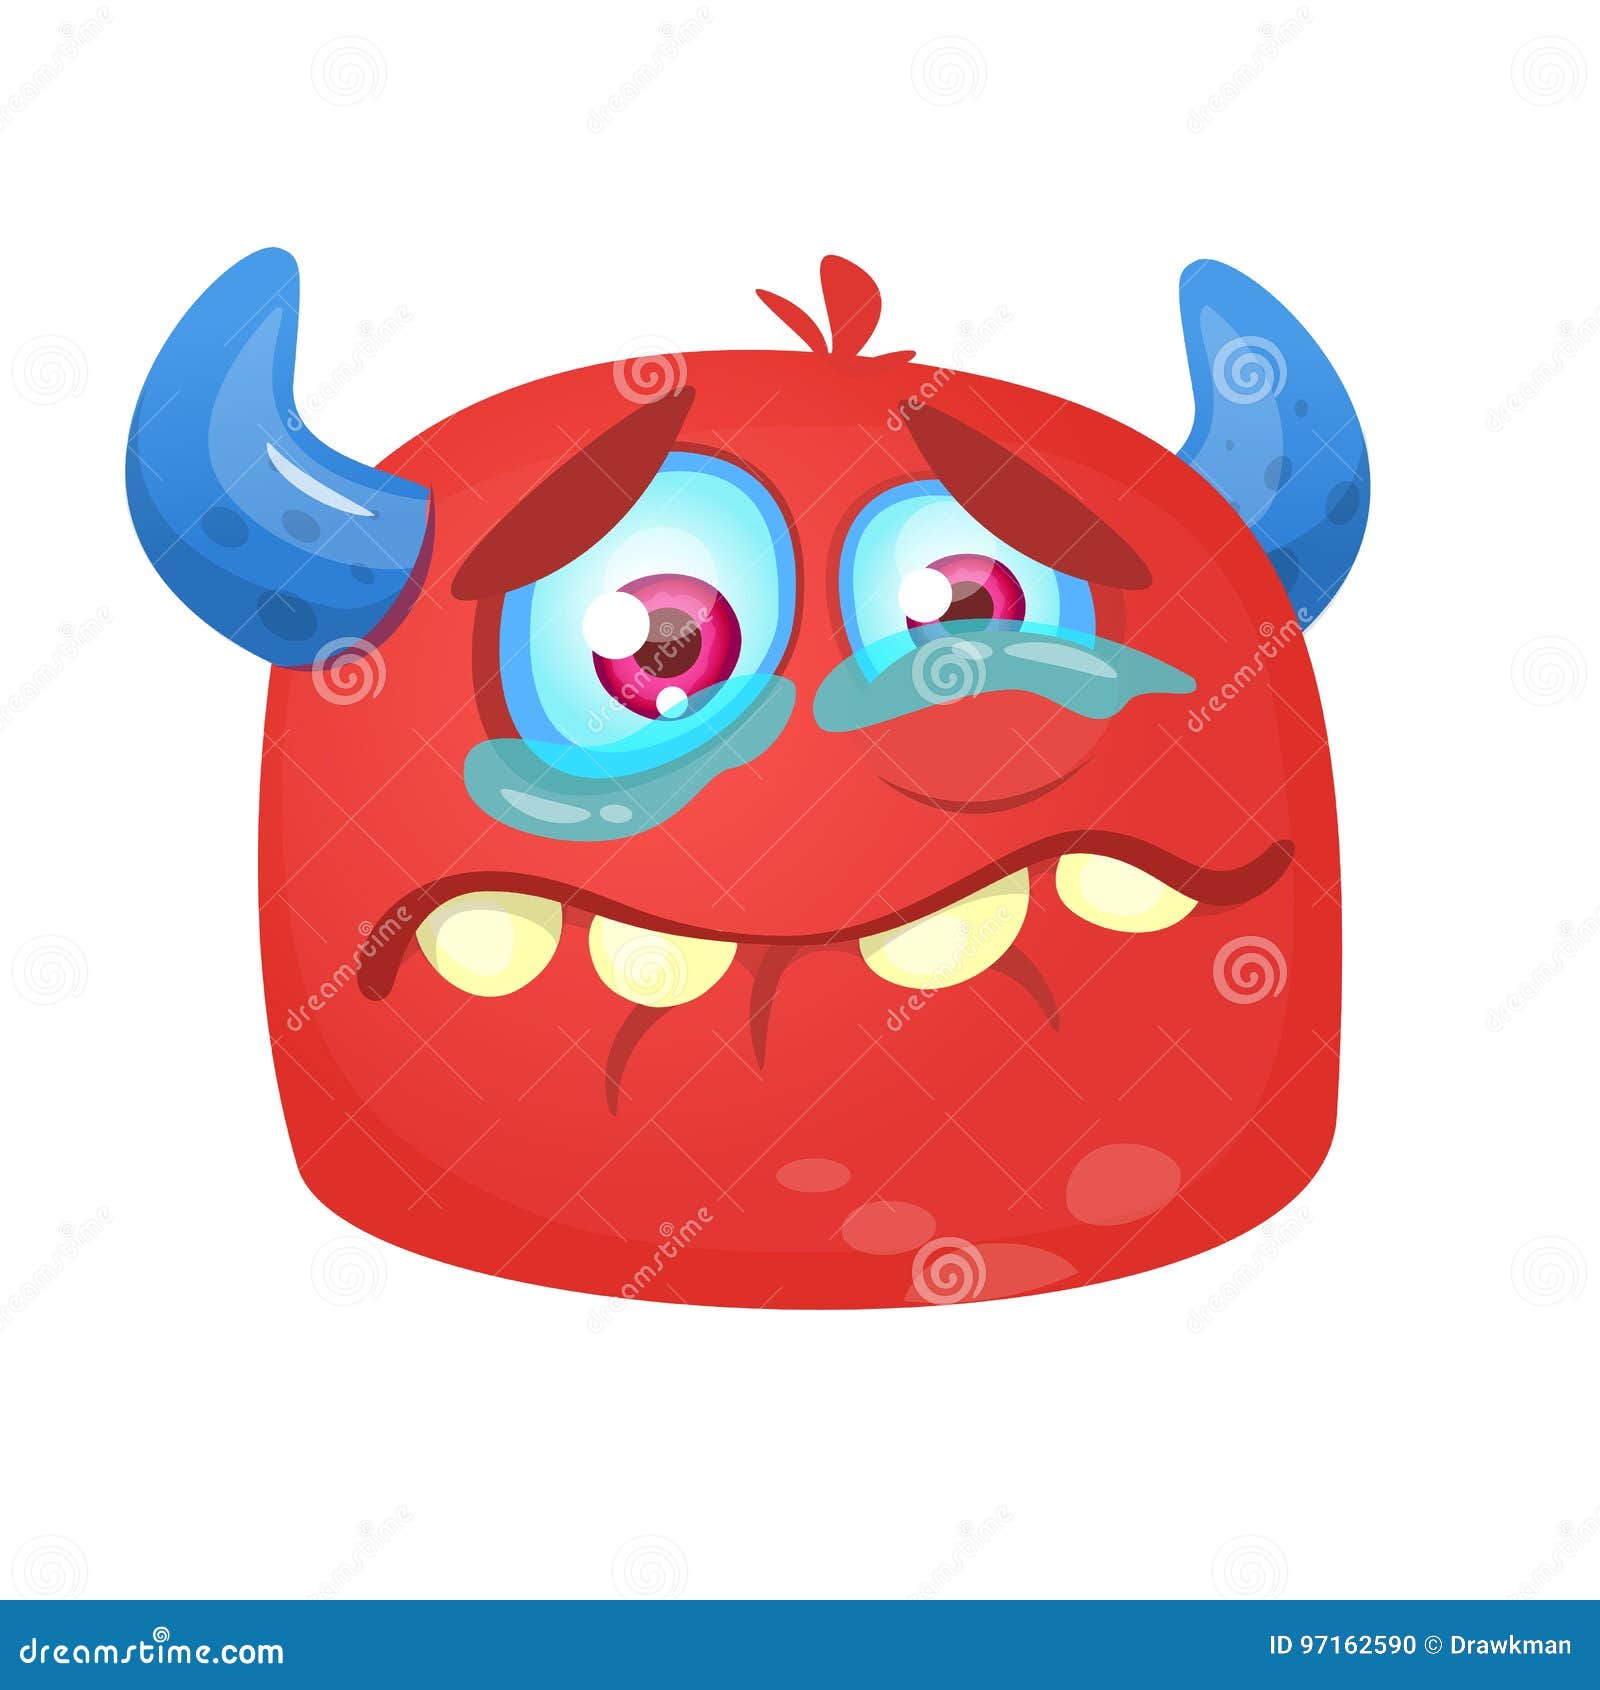 Crying Cartoon Monster Icon. Halloween Vector Red and Horned Monster ...